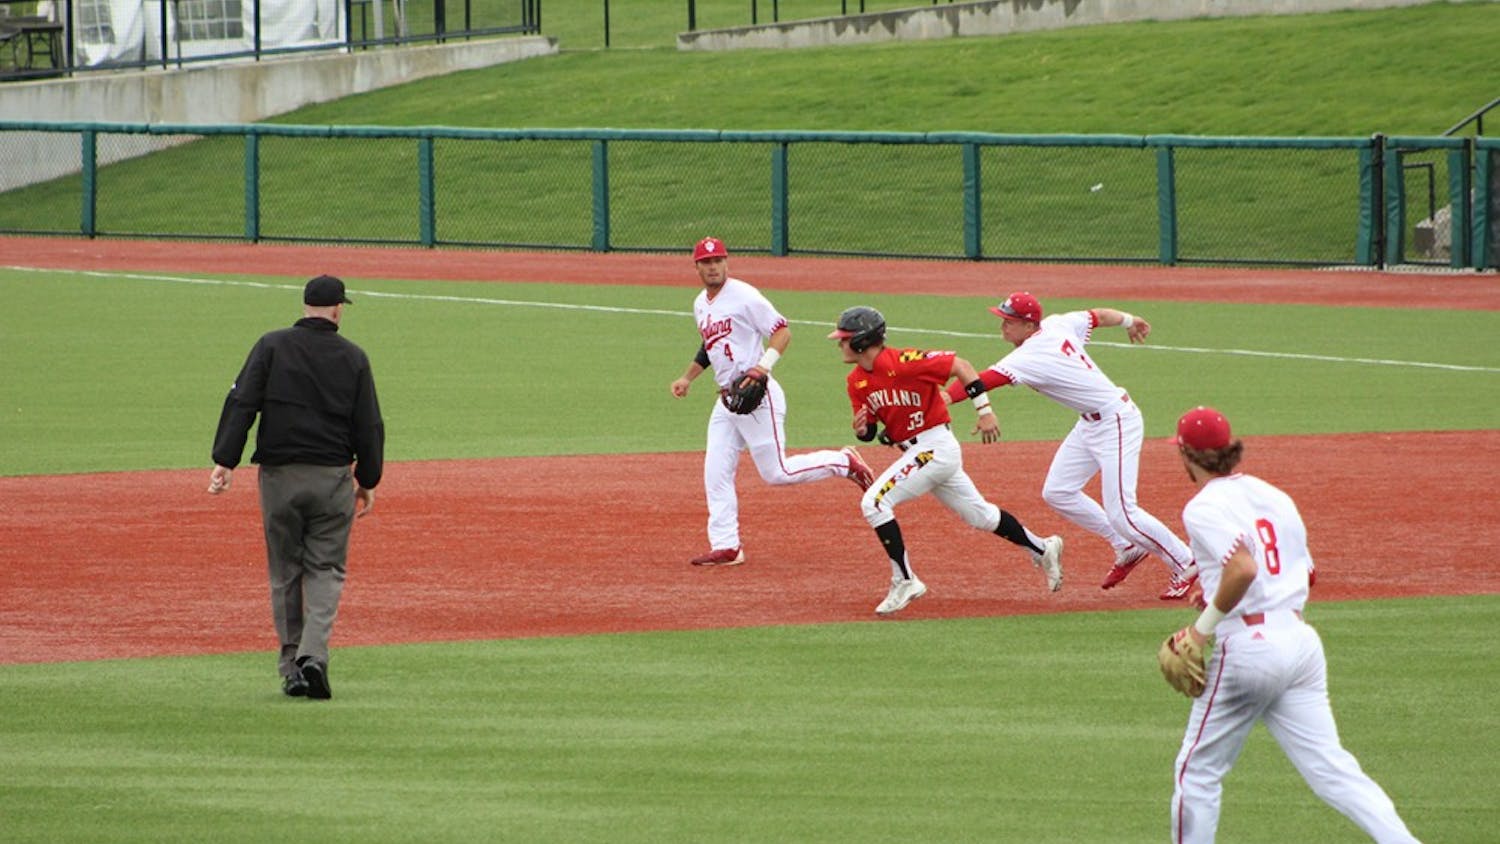 First baseman Matt Gorski tags out a Maryland baserunner in the top of the second after he got caught in a pickle. This was the first game of the series between the Hoosiers and the Terrapins.
